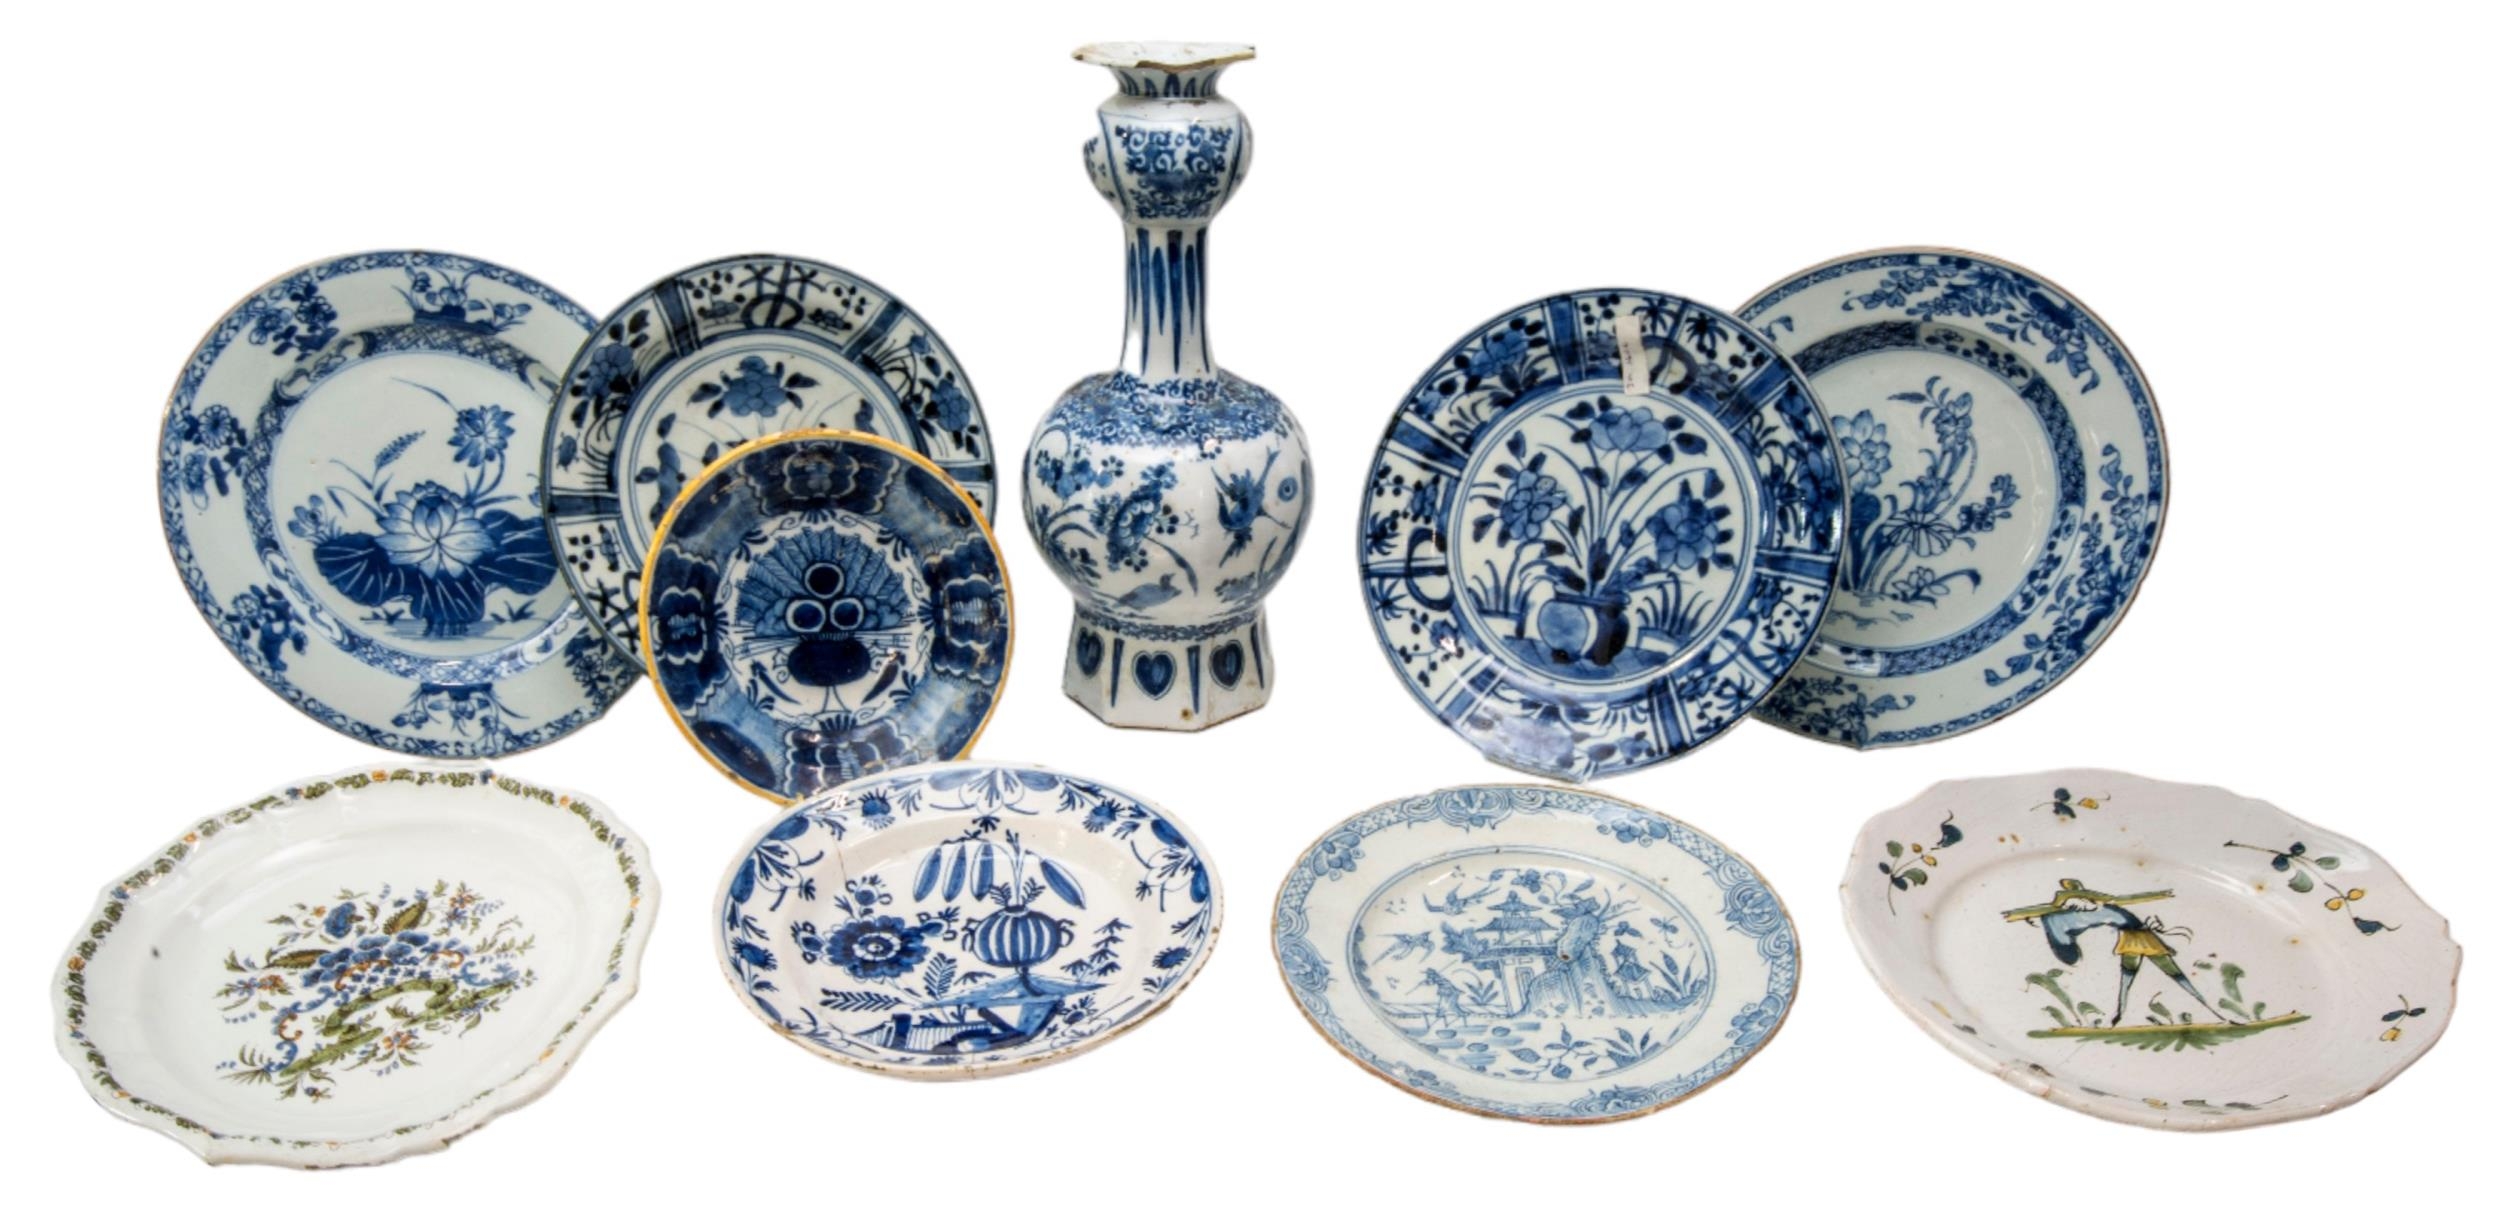 A MIXED GROUP OF NINE DELFT DISHES AND A BOTTLE VASE, 18TH CENTURY AND LATER, the dishes include two